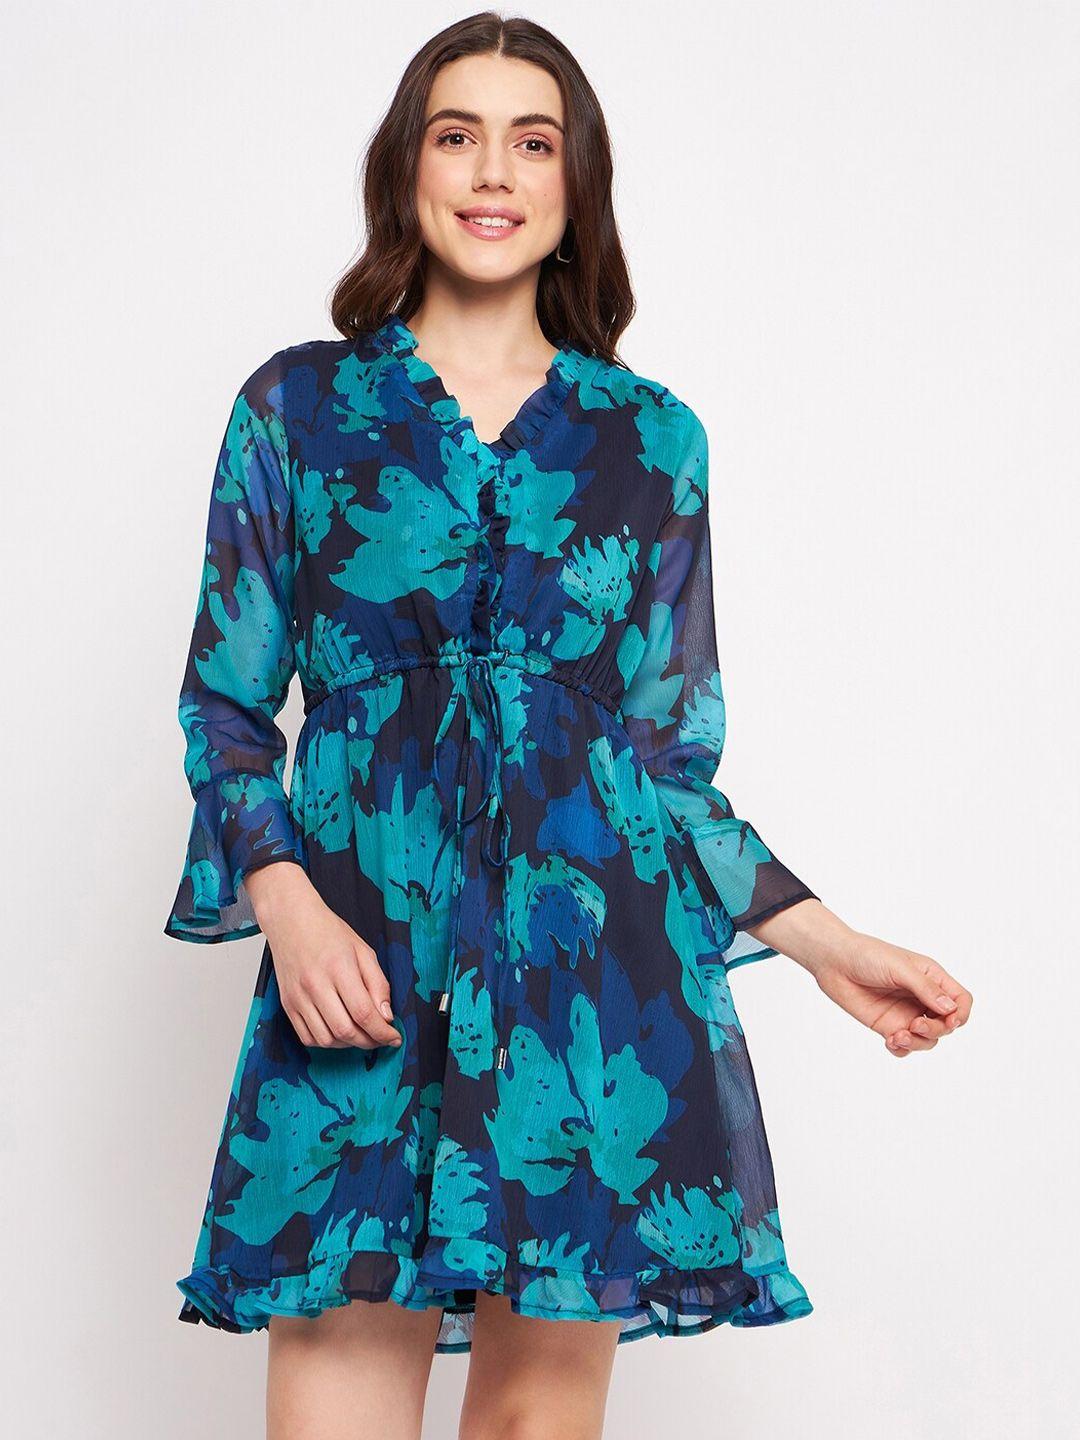 delan floral printed v-neck bell sleeve tie-up ruffled & smocked chiffon fit & flare dress